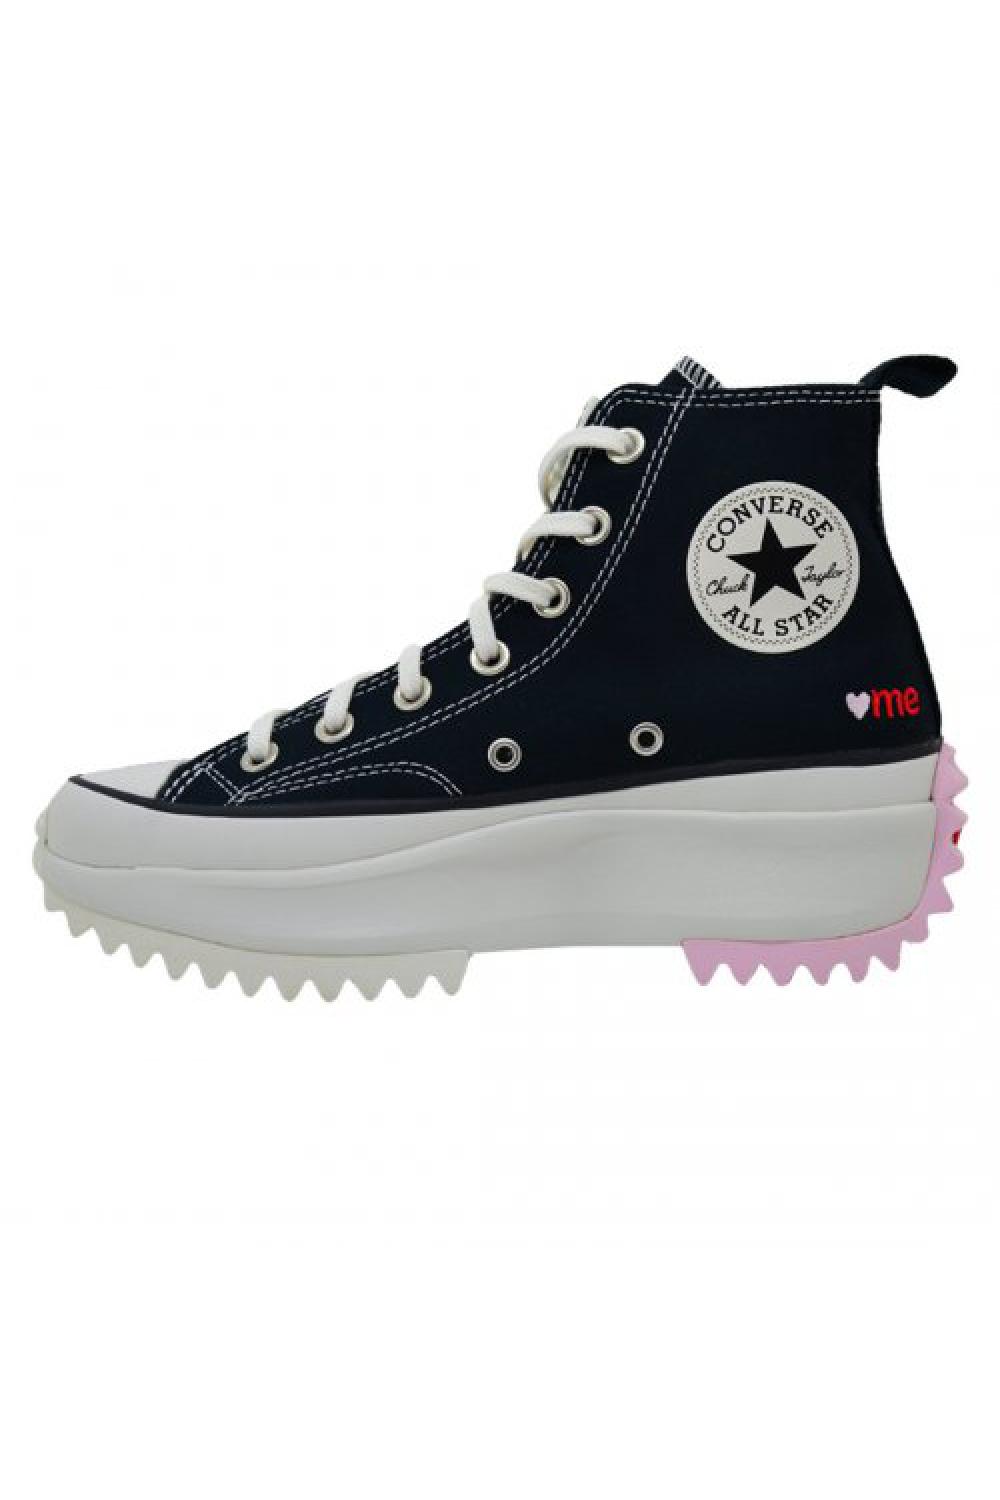 ALL STAR CONVERSE Sneaker Run Star Hike Valentines With Love - Μαύρο - Λευκό (A01598C)